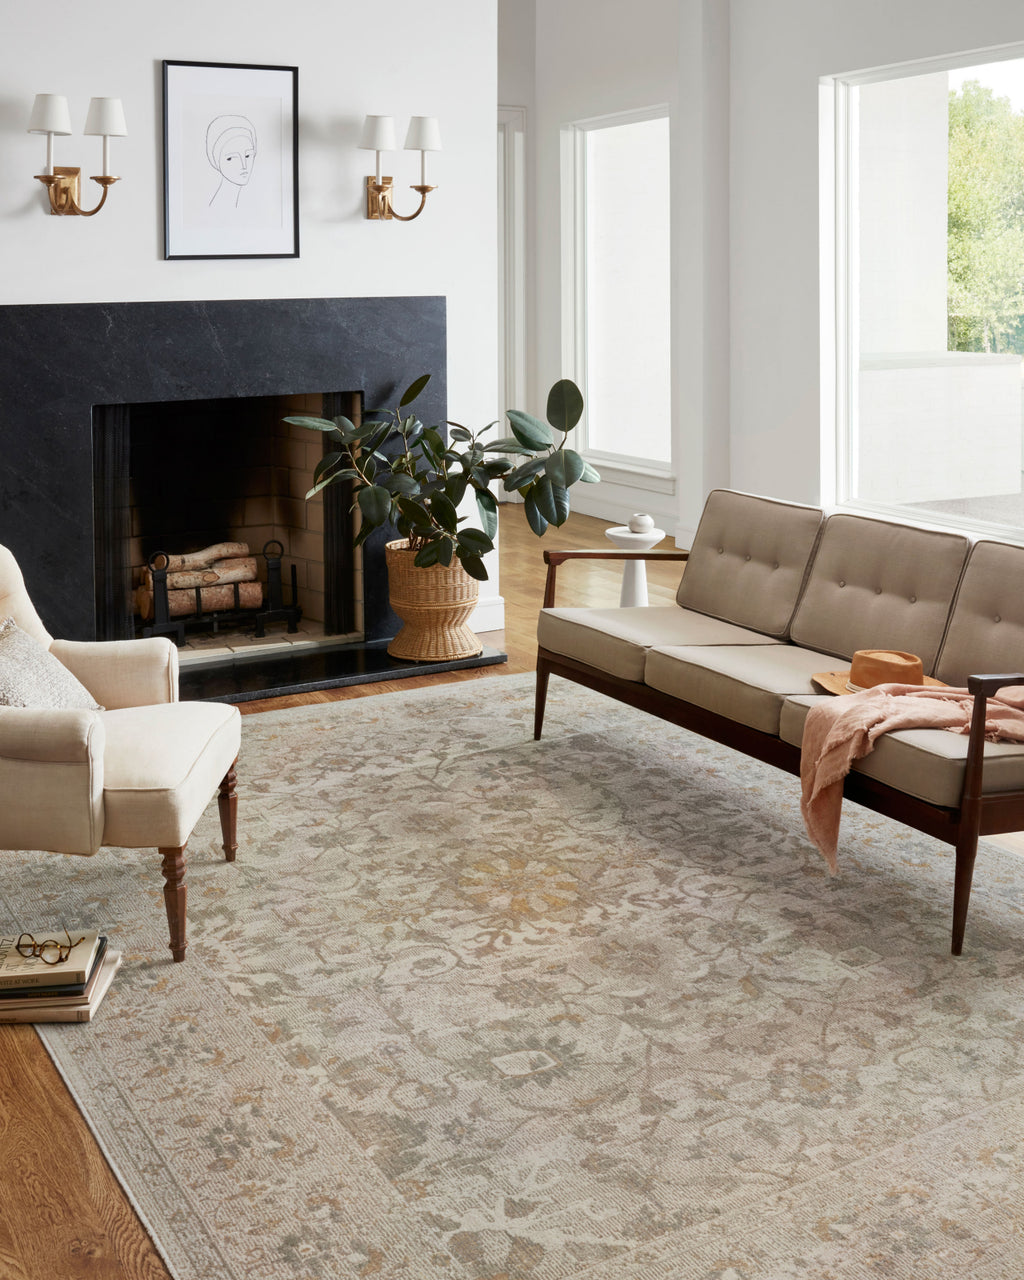 Chris Loves Julia x Loloi Rosemarie ROE-02 Ivory/Natural Area Rug Lifestyle Image Feature